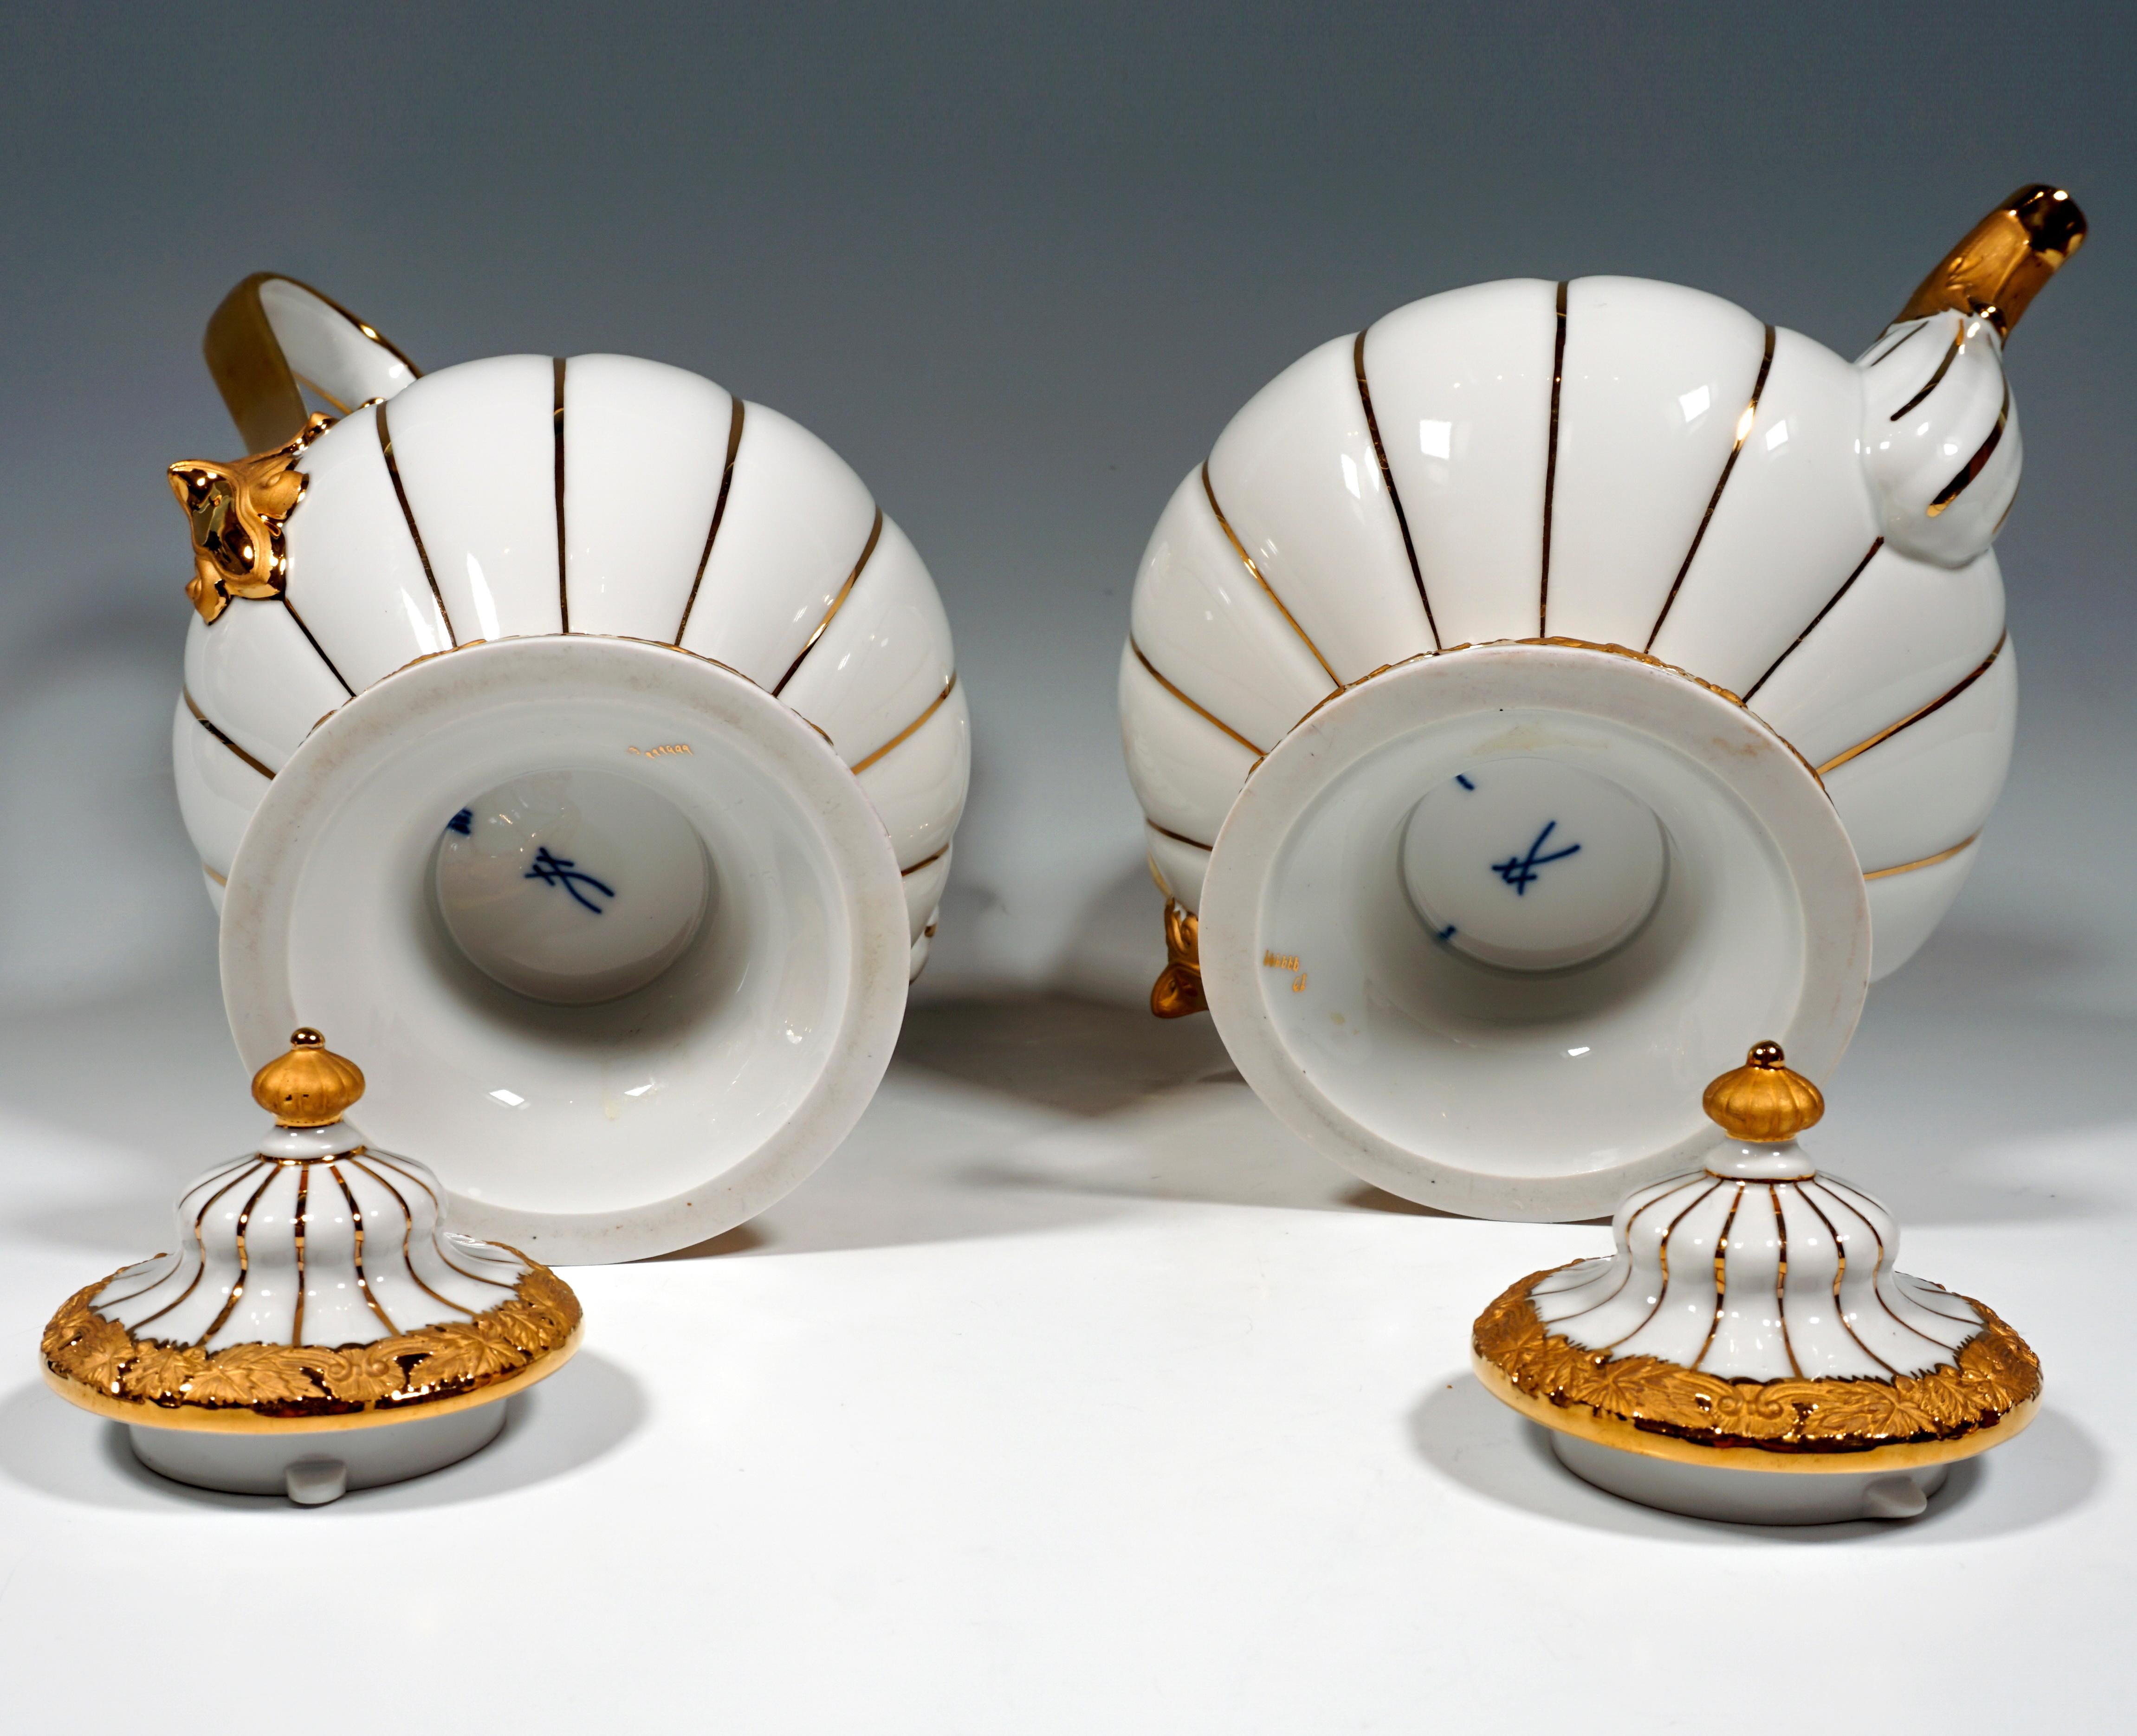 German Meissen Coffee & Tea Set For 6 Persons, X-Shape, With Elaborate Gold Decor